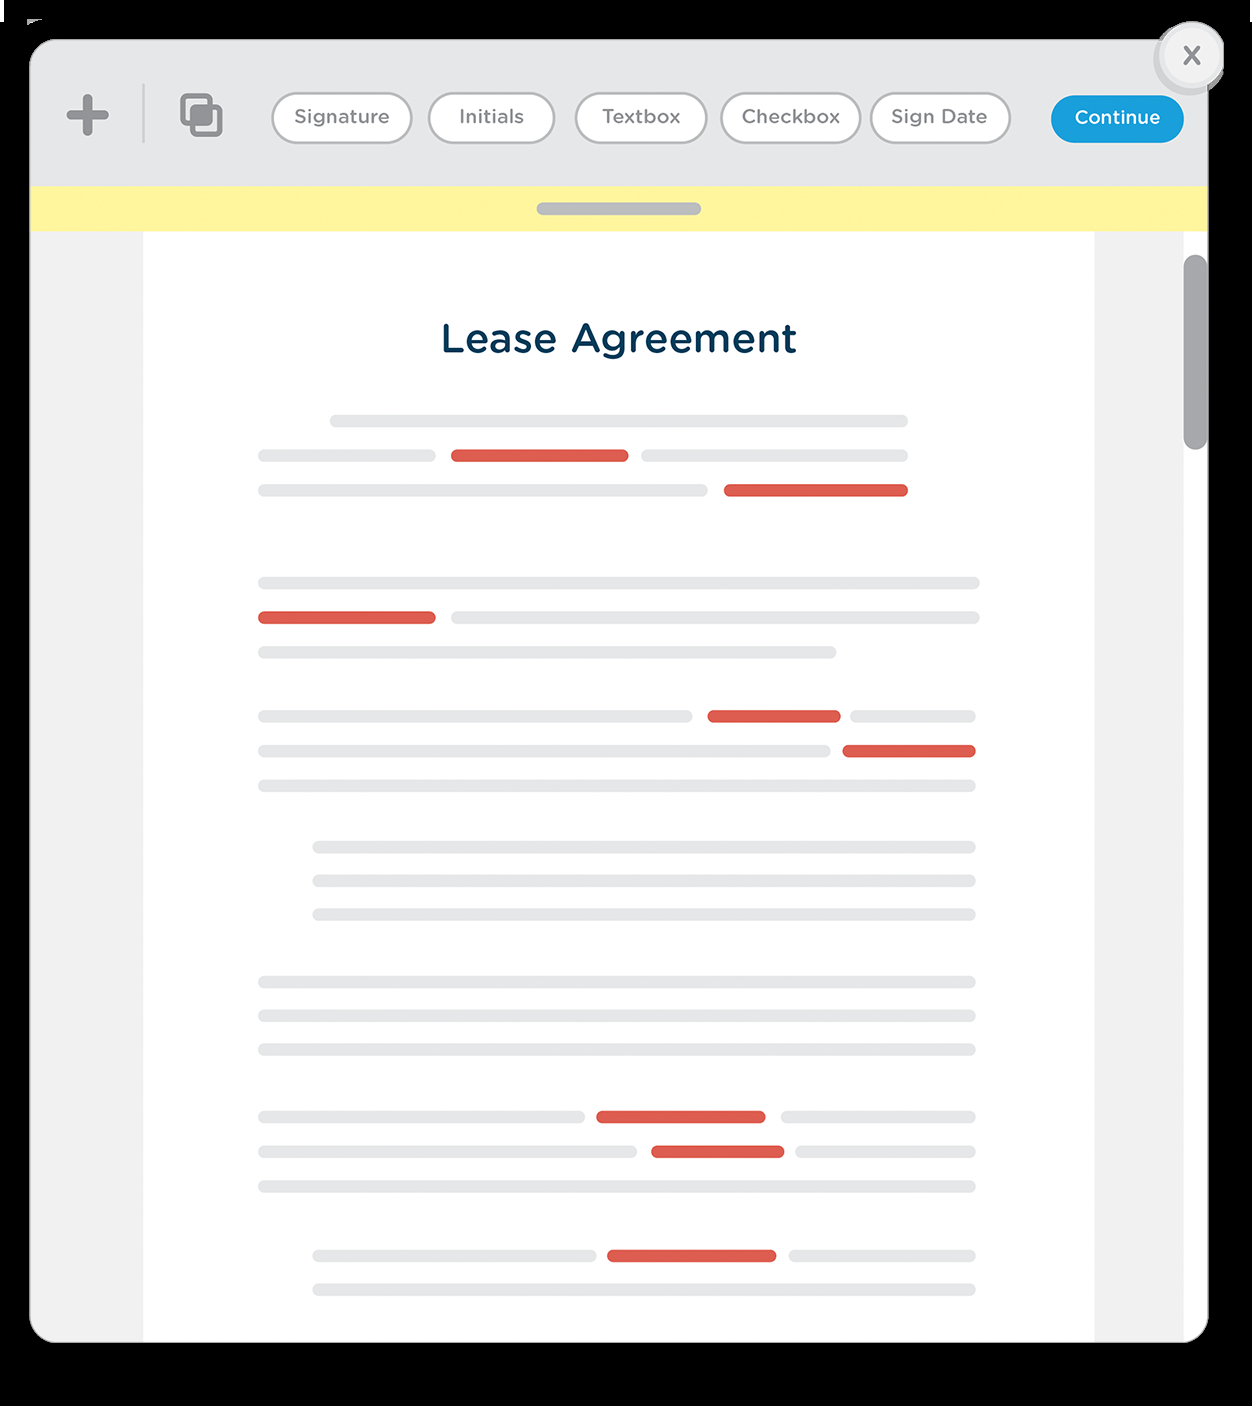 Mobile Home Lease Agreement Sign Store And Customize Leases Online For Free Innago